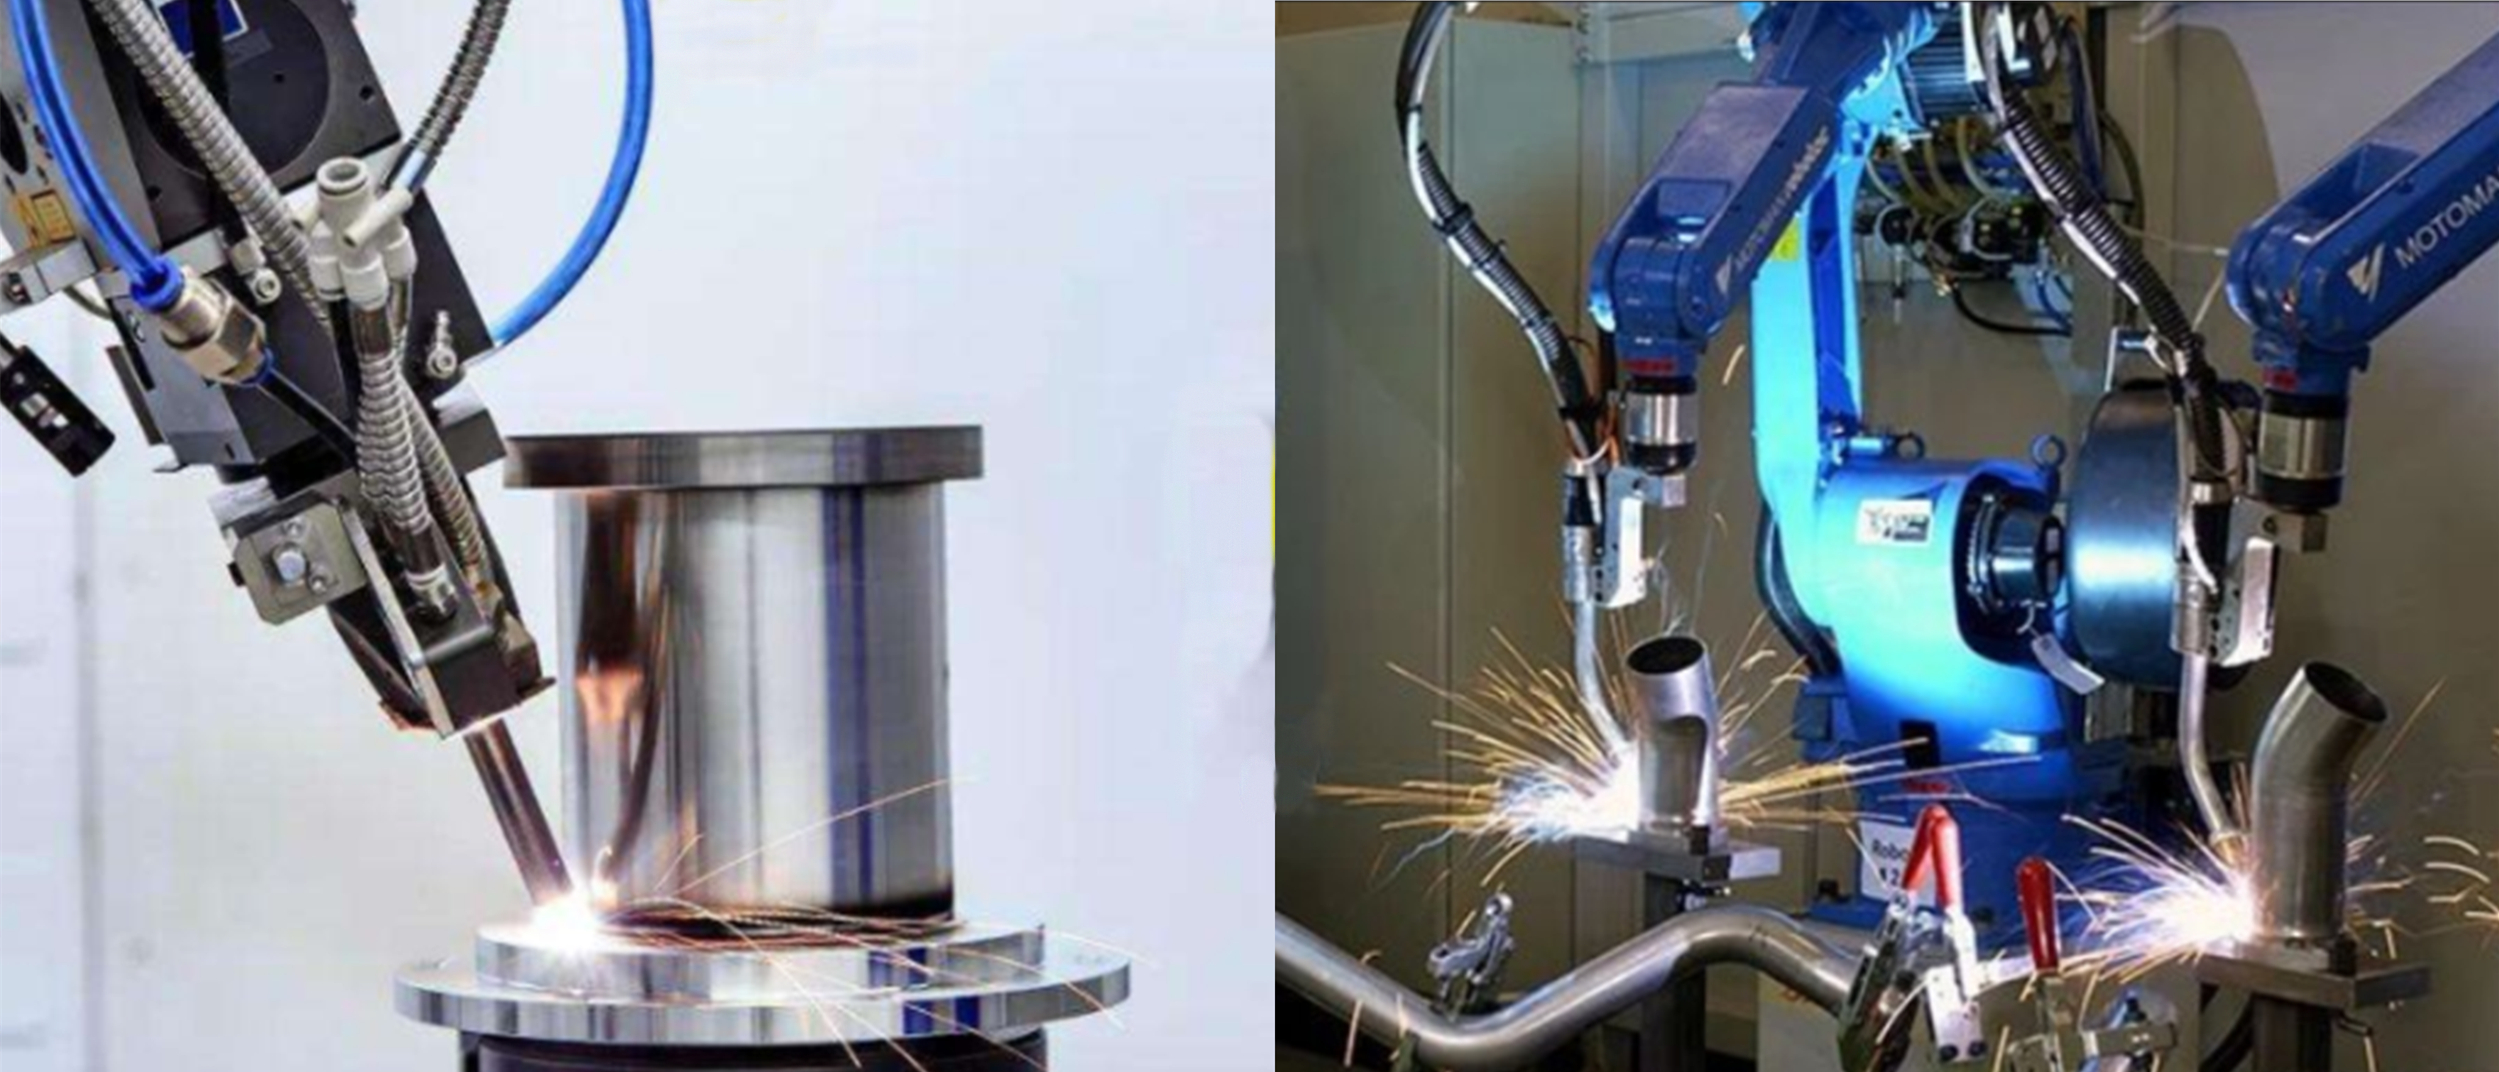 Composition and characteristics of robot laser welding system